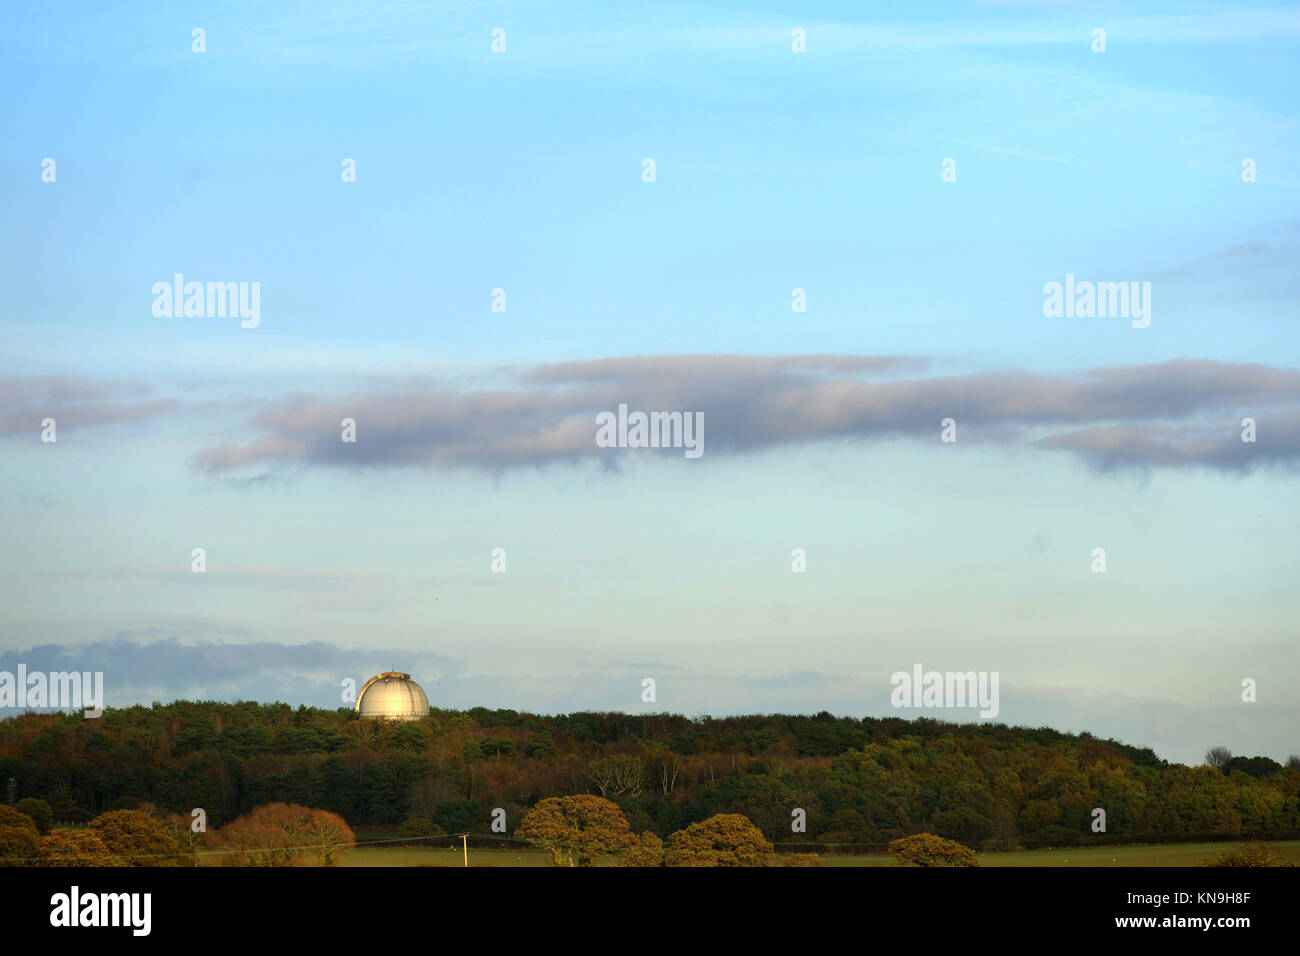 Sir Isaac Newton Observatory at Herstmonceux, East Sussex, the former Royal Greenwich observatory site. Stock Photo